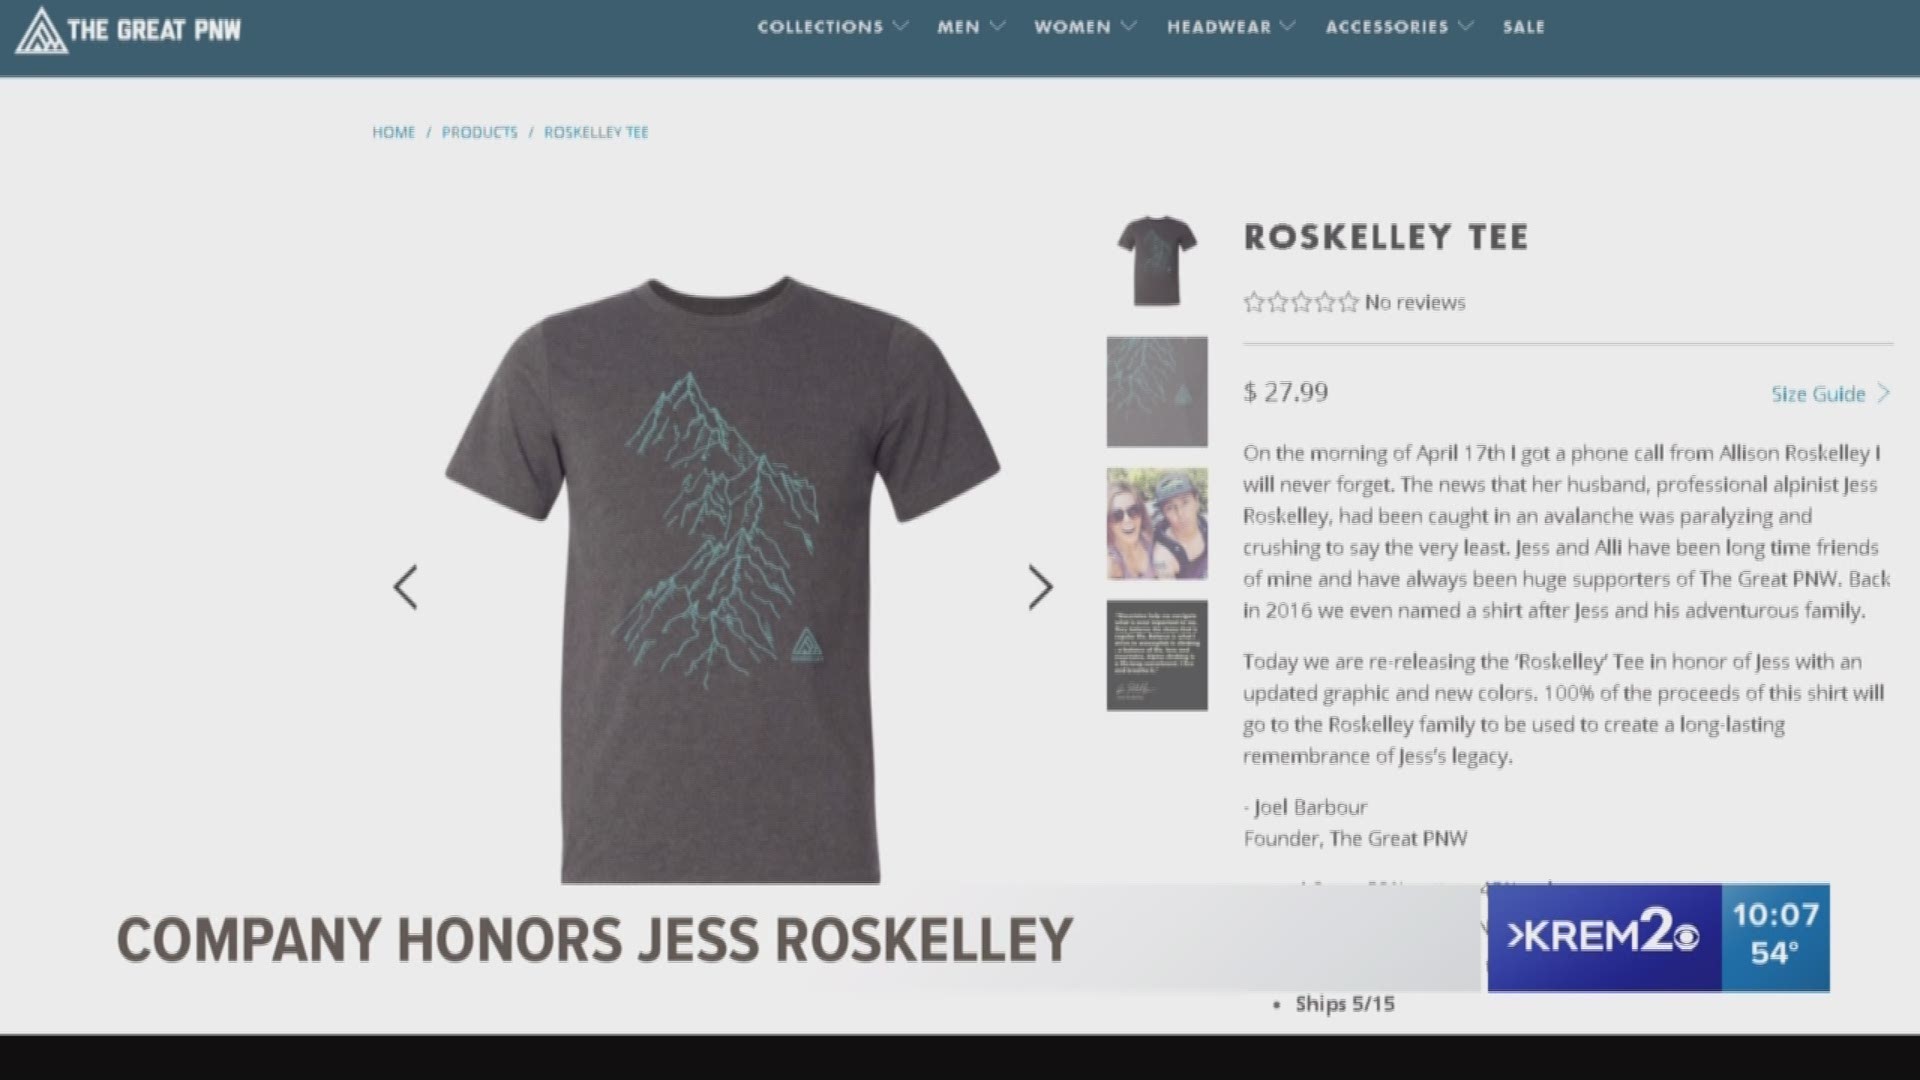 Spokane native and world-renowned climber Jess Roskelley was killed in avalanche last week. Now, The Great PNW is selling shirts to create a long-lasting memory of his legacy.